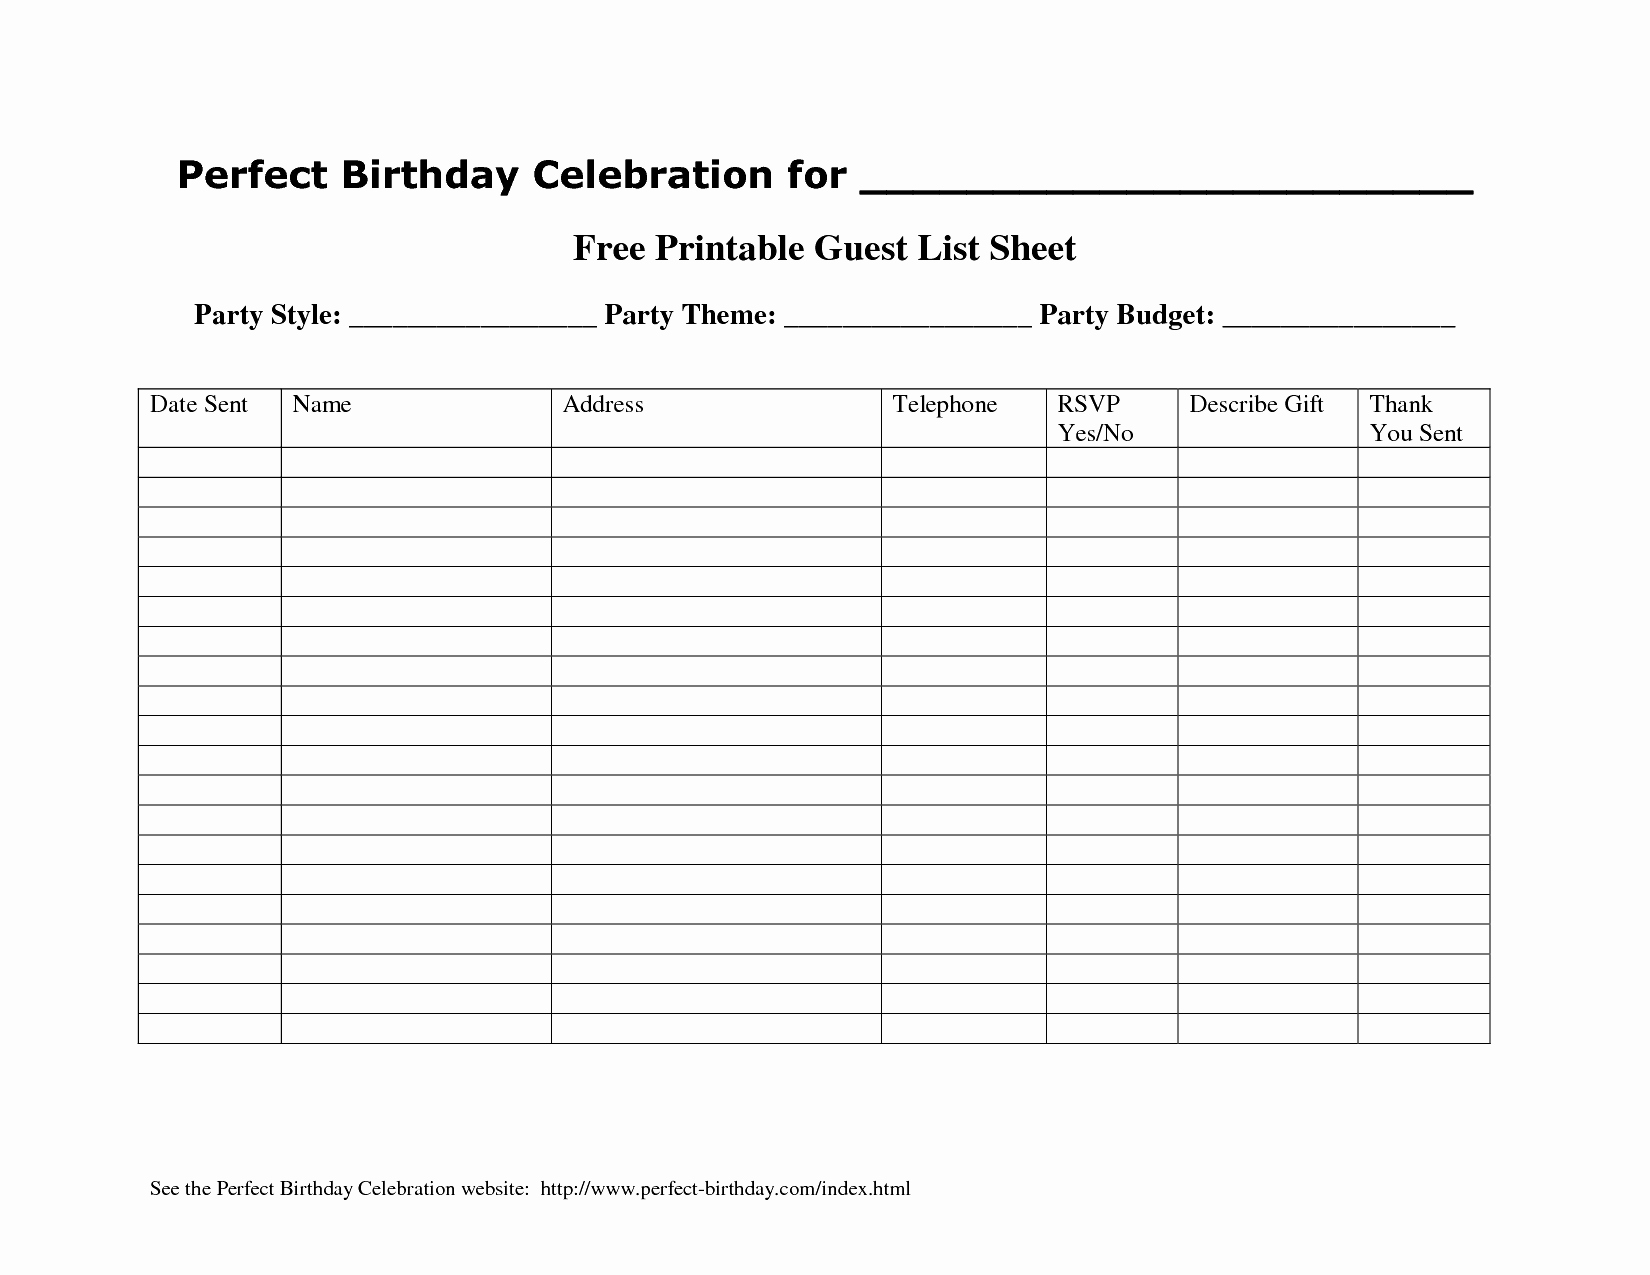 Birthday Party Guest List Template Awesome Similiar Wedding Party Name List Keywords Guest Template